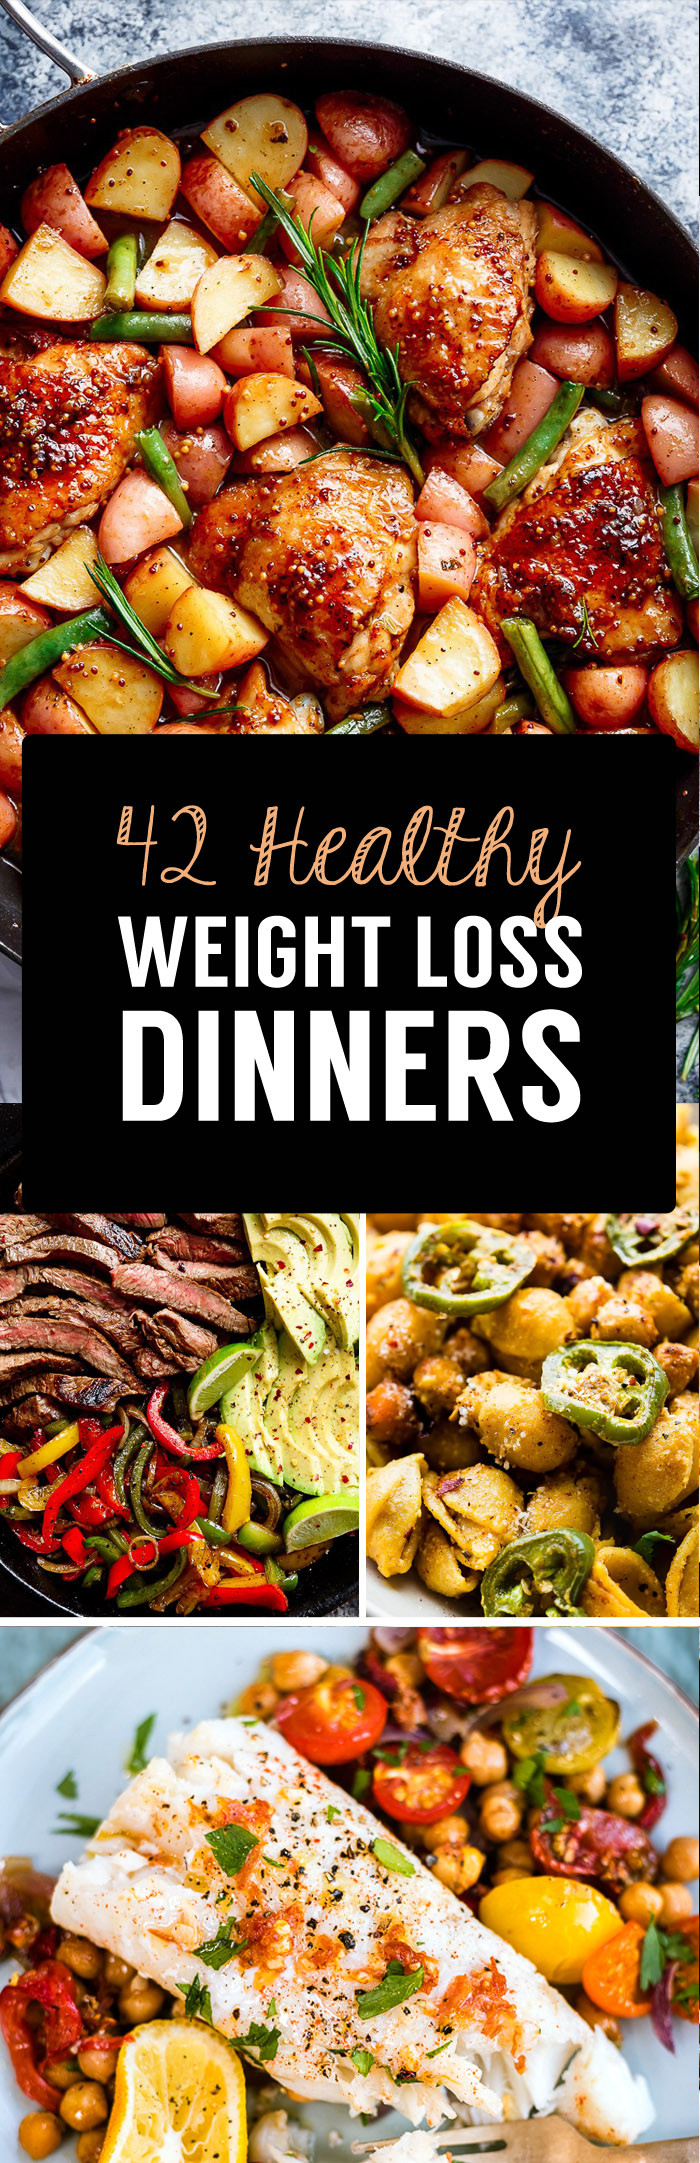 Quick Weight Loss Lunch
 42 Weight Loss Dinner Recipes That Will Help You Shrink